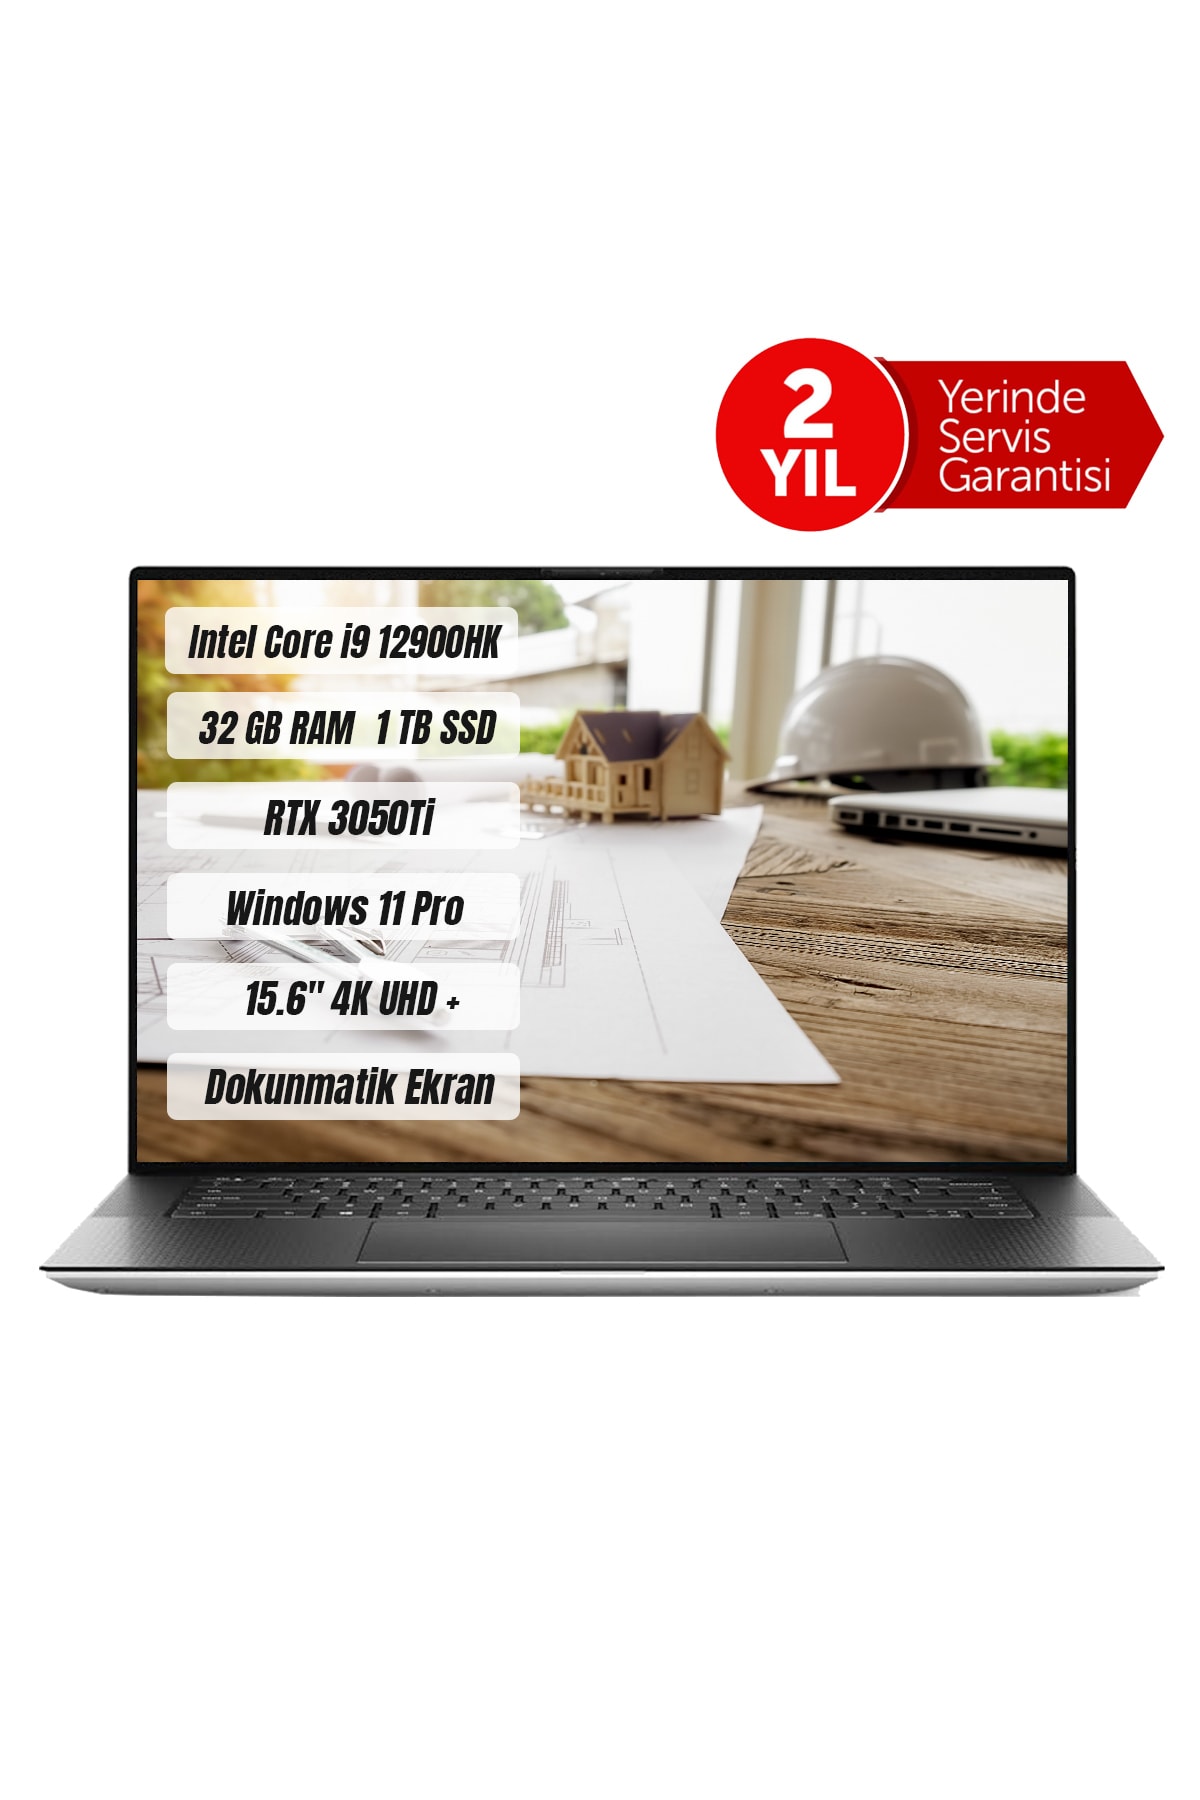 Dell Xps 15 9520 I9 12900hk 32gb 1tb Ssd Rtx3050tı W11p15.6 4k Uhd+touch Notebook Xps95201600wp